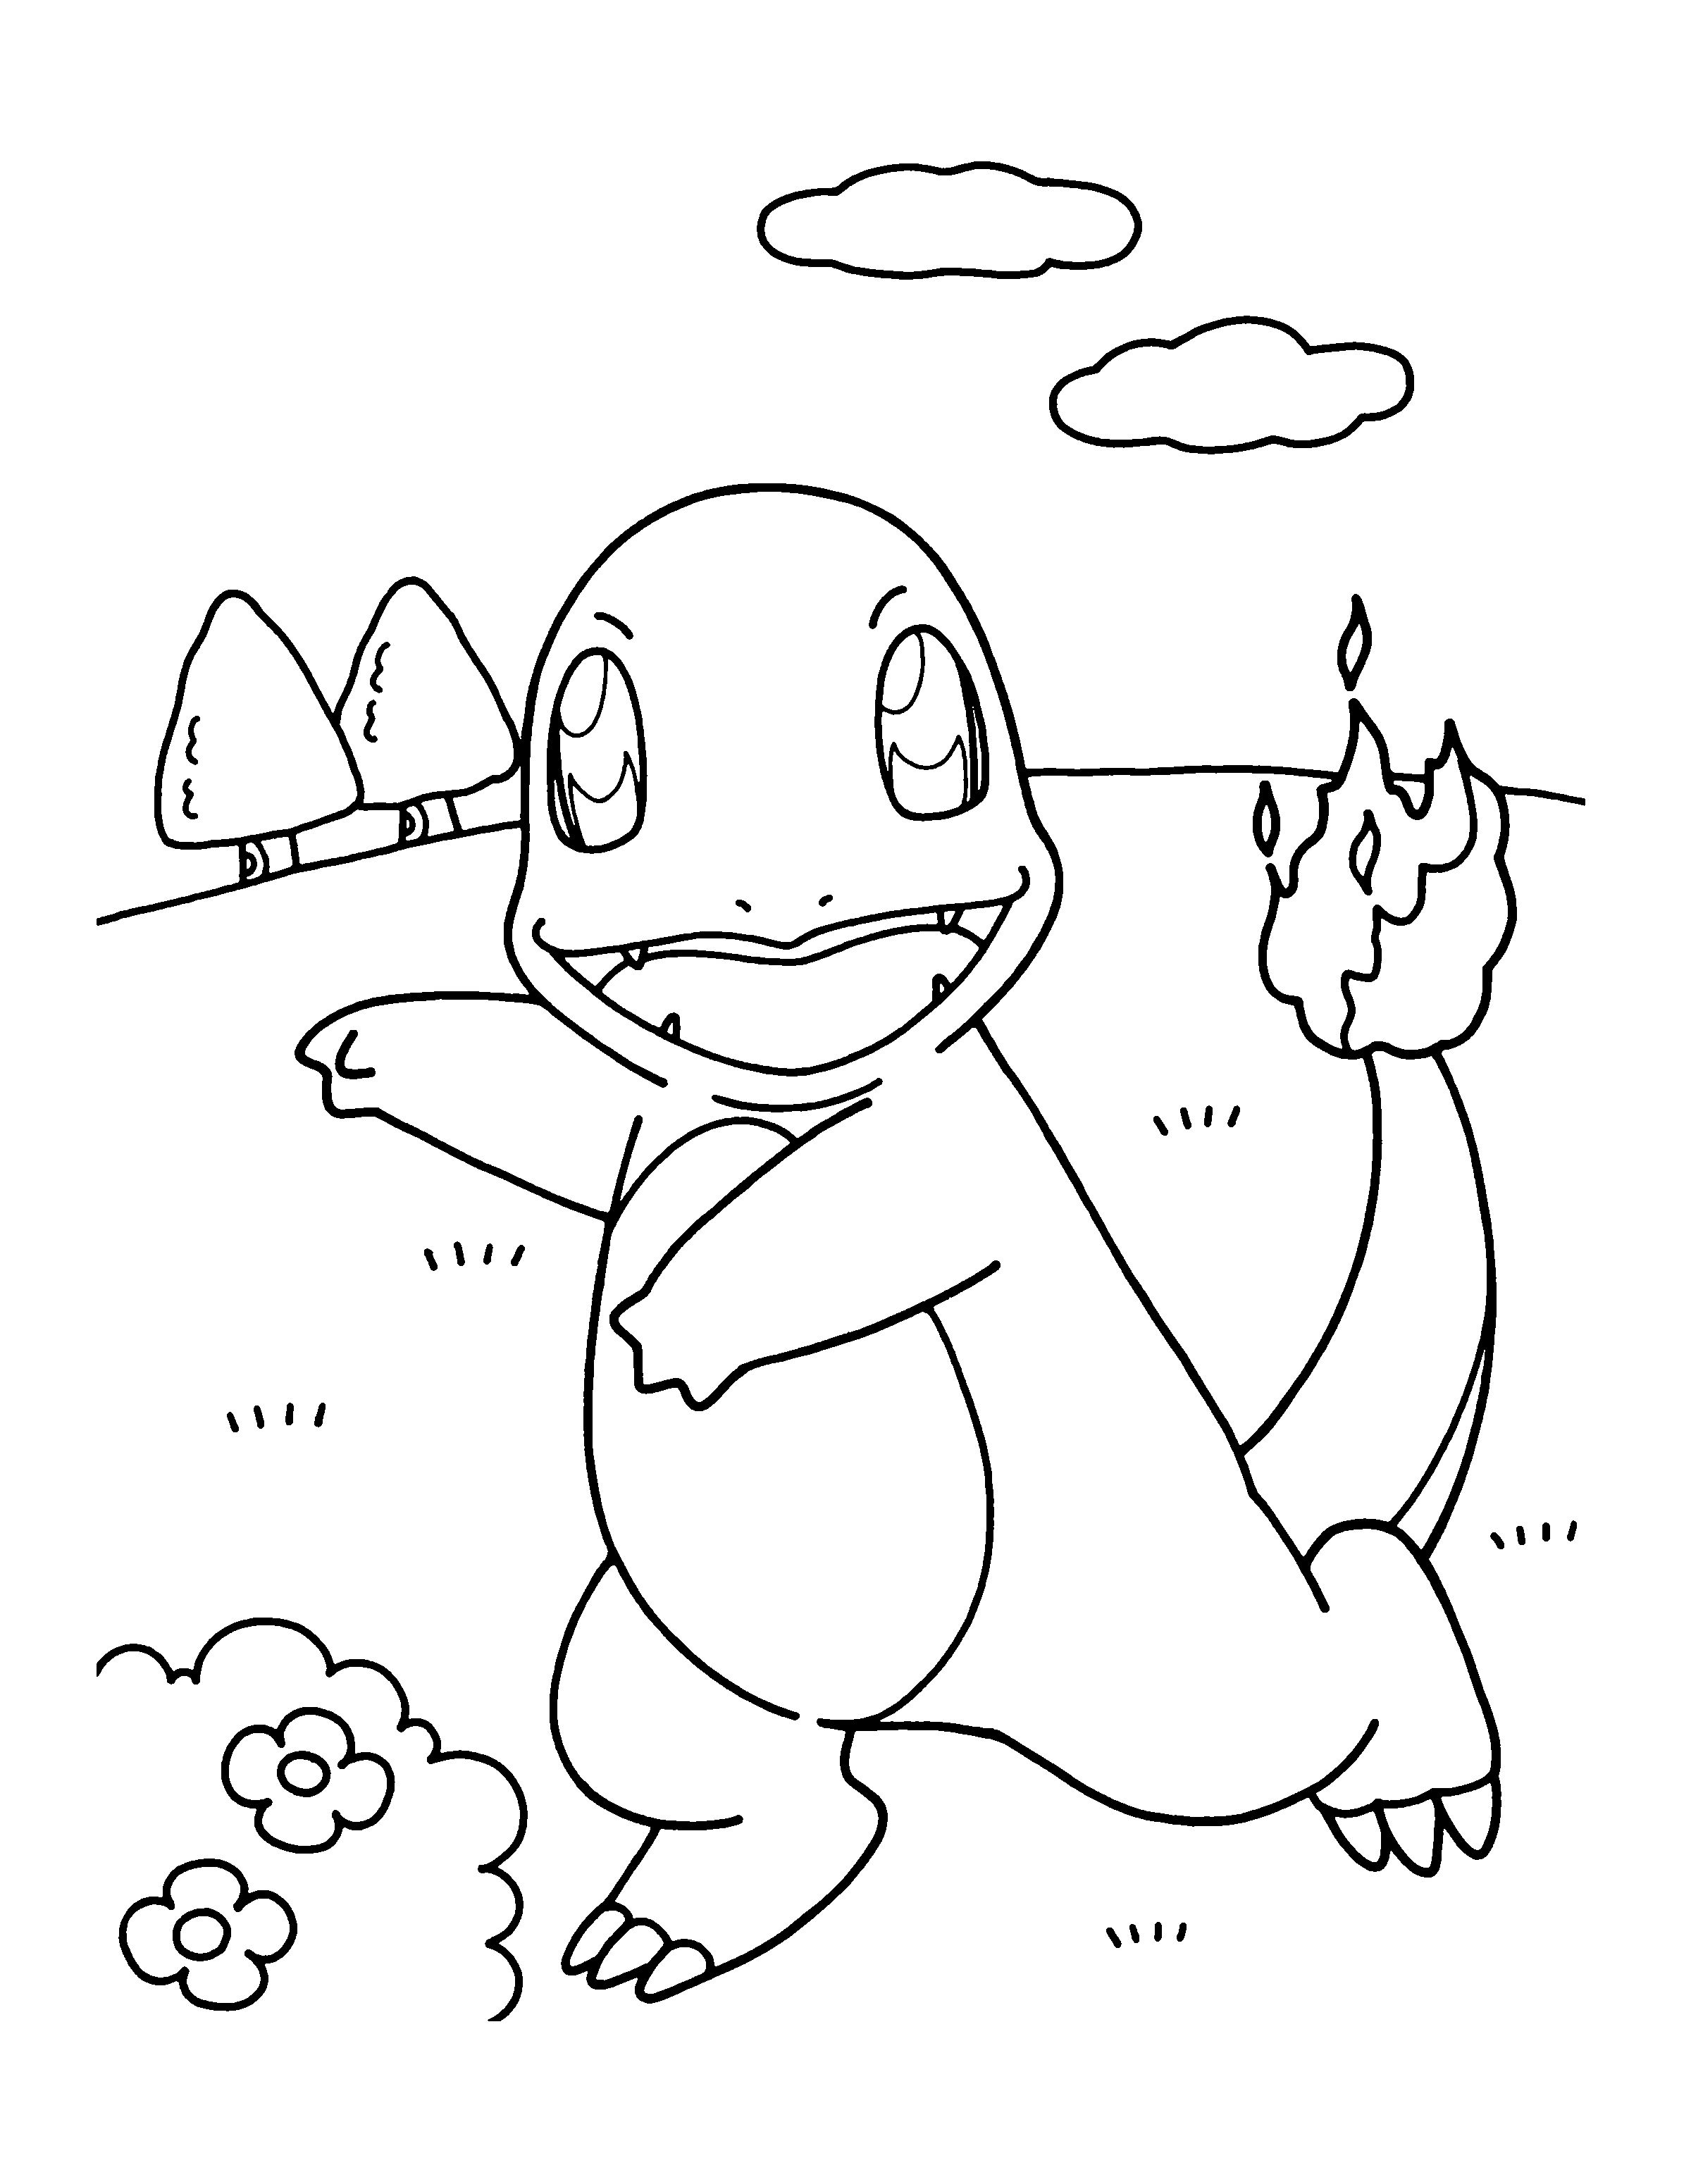 Free printable pokemon coloring pages: 37 pics - HOW-TO-DRAW in 1 minute